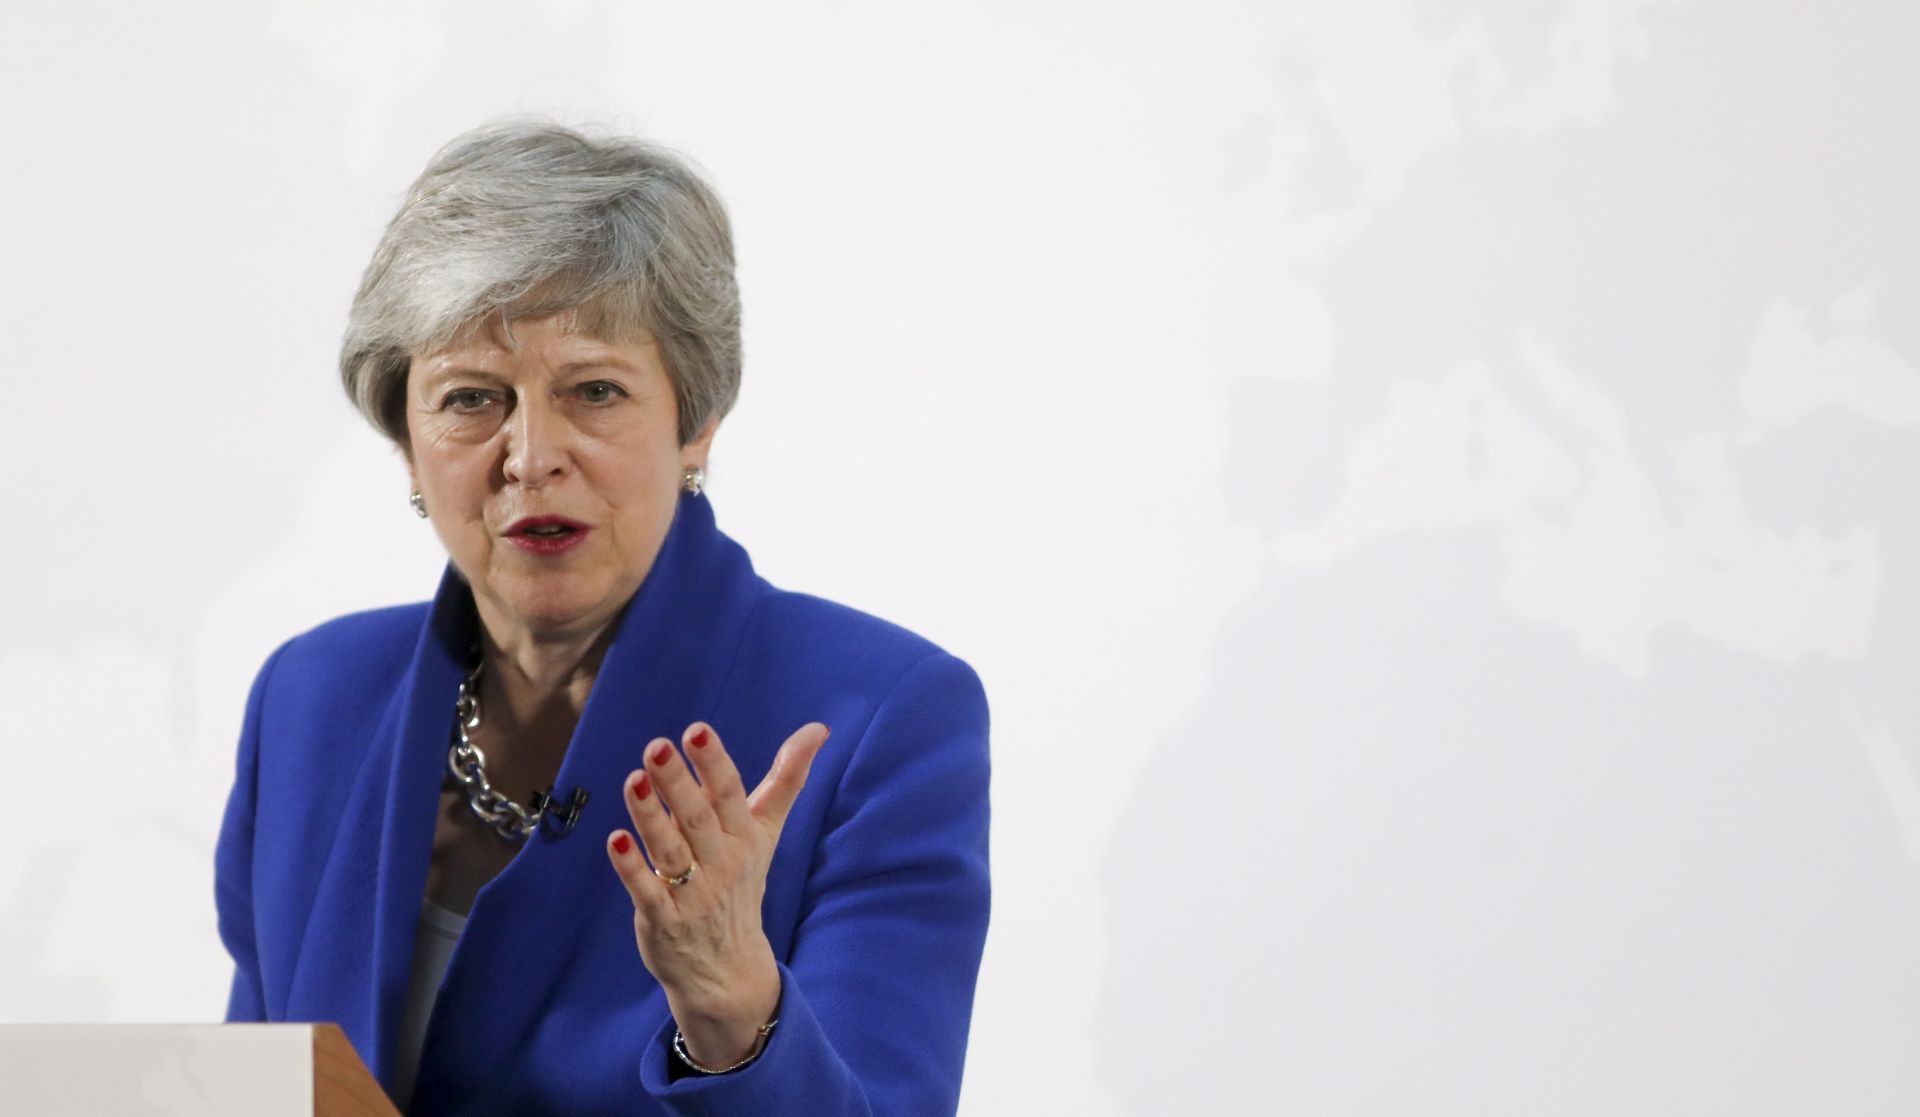 epa07589959 British prime minister Theresa May delivers a speech setting out a new proposal for her Brexit deal in London, Britain, on 21 May 2019. The premier is considering tighter customs ties with the European Union.  EPA/Chris Ratcliffe / POOL